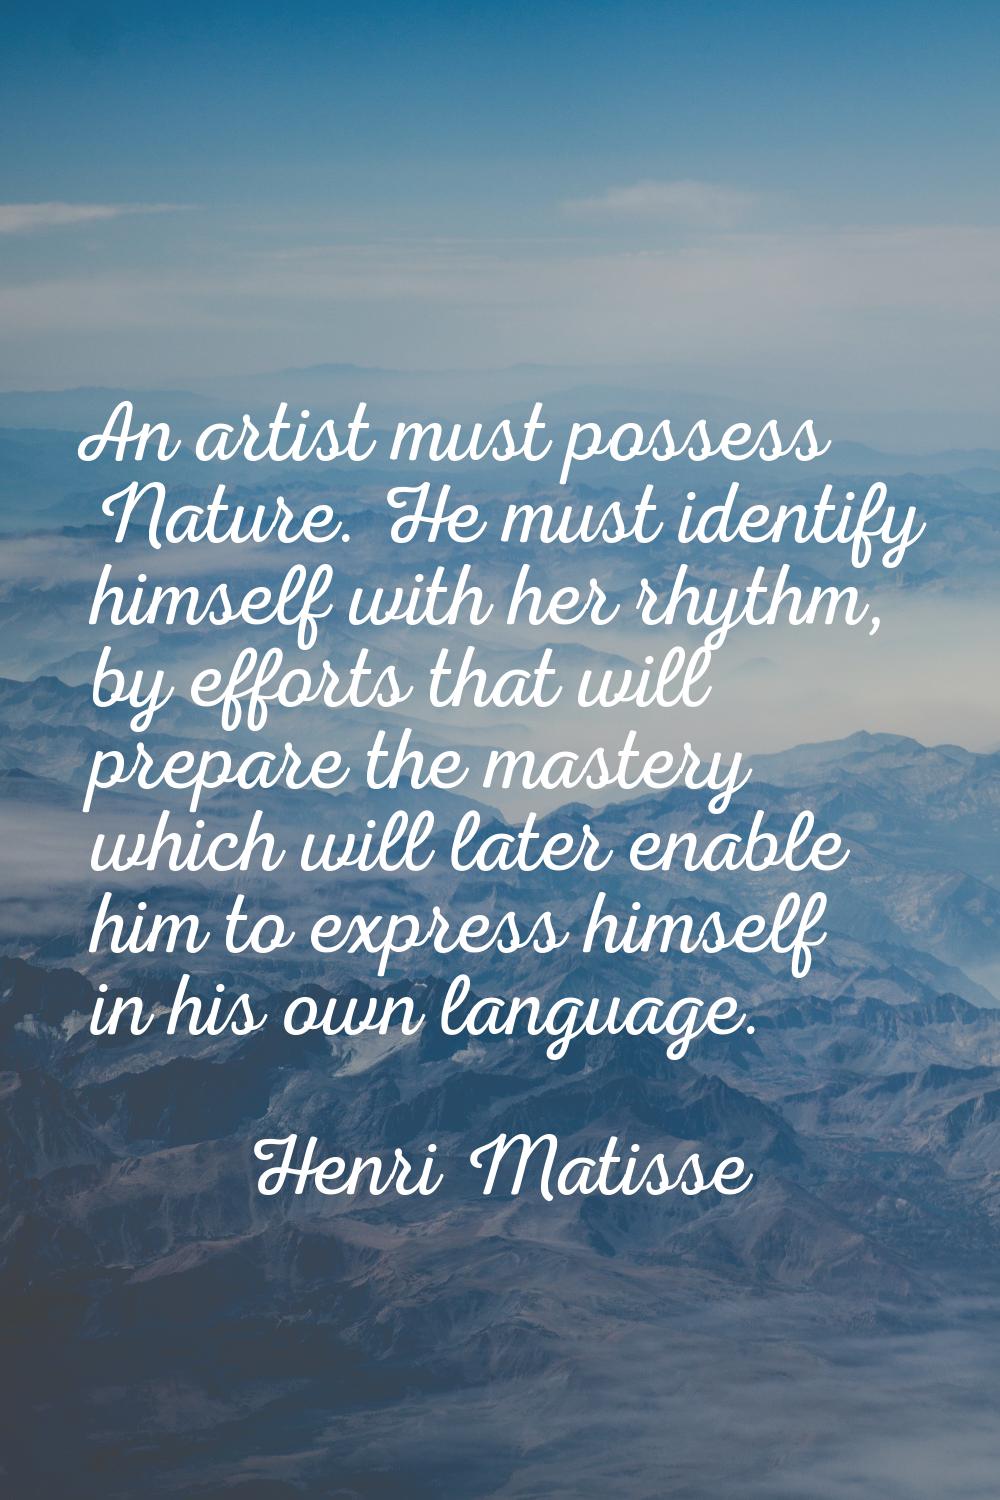 An artist must possess Nature. He must identify himself with her rhythm, by efforts that will prepa